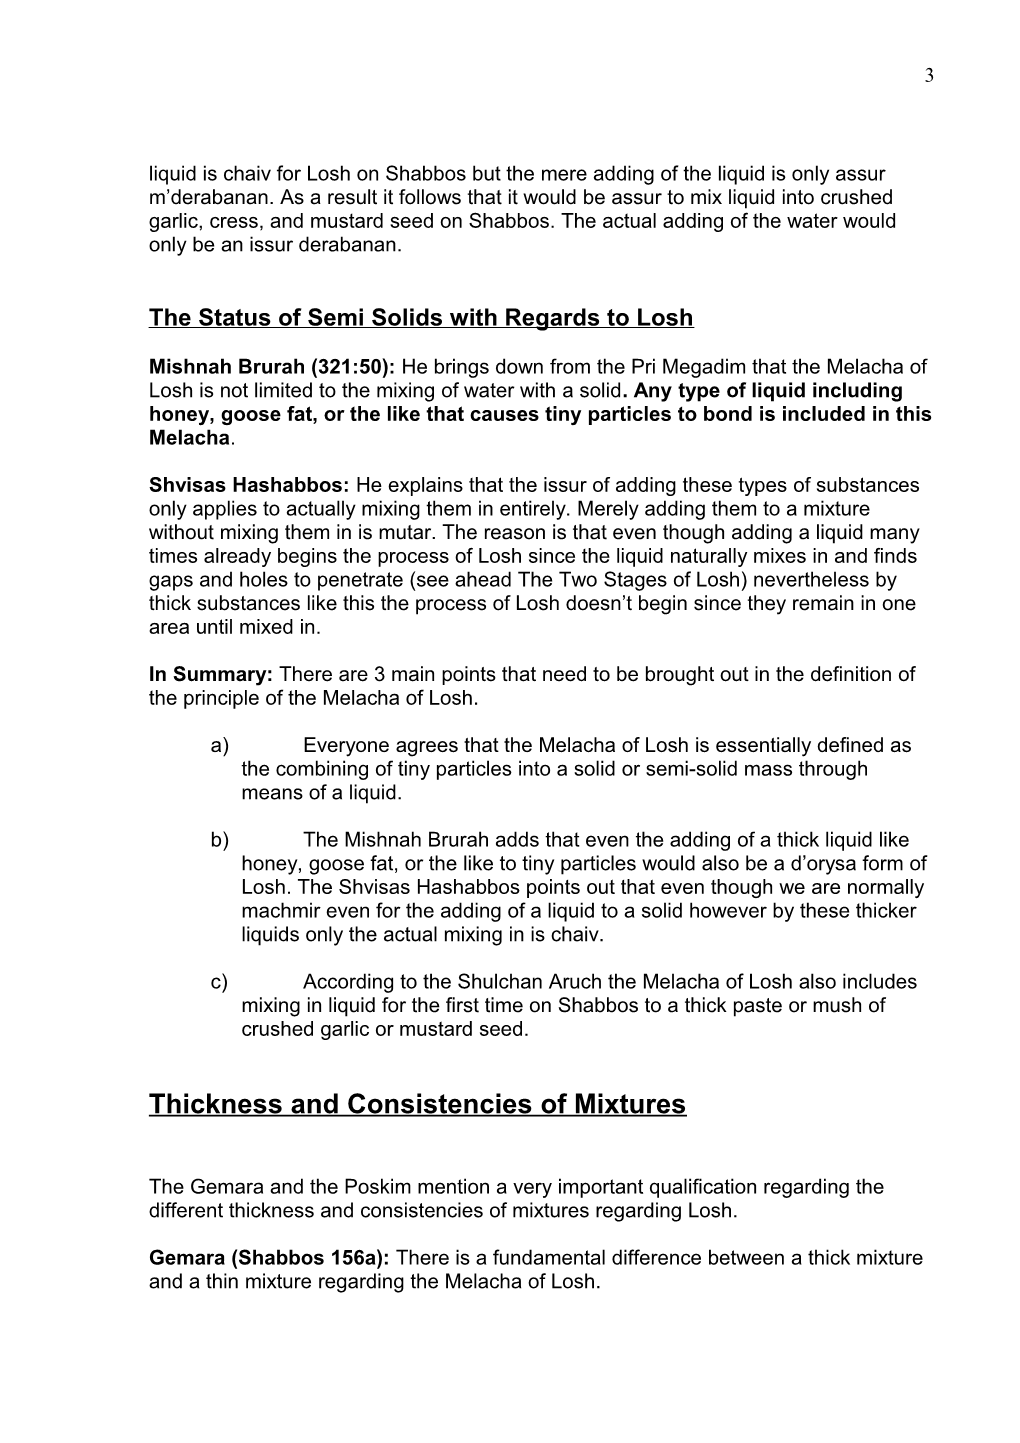 Review Sheet for Maleches Losh (Siman 321)